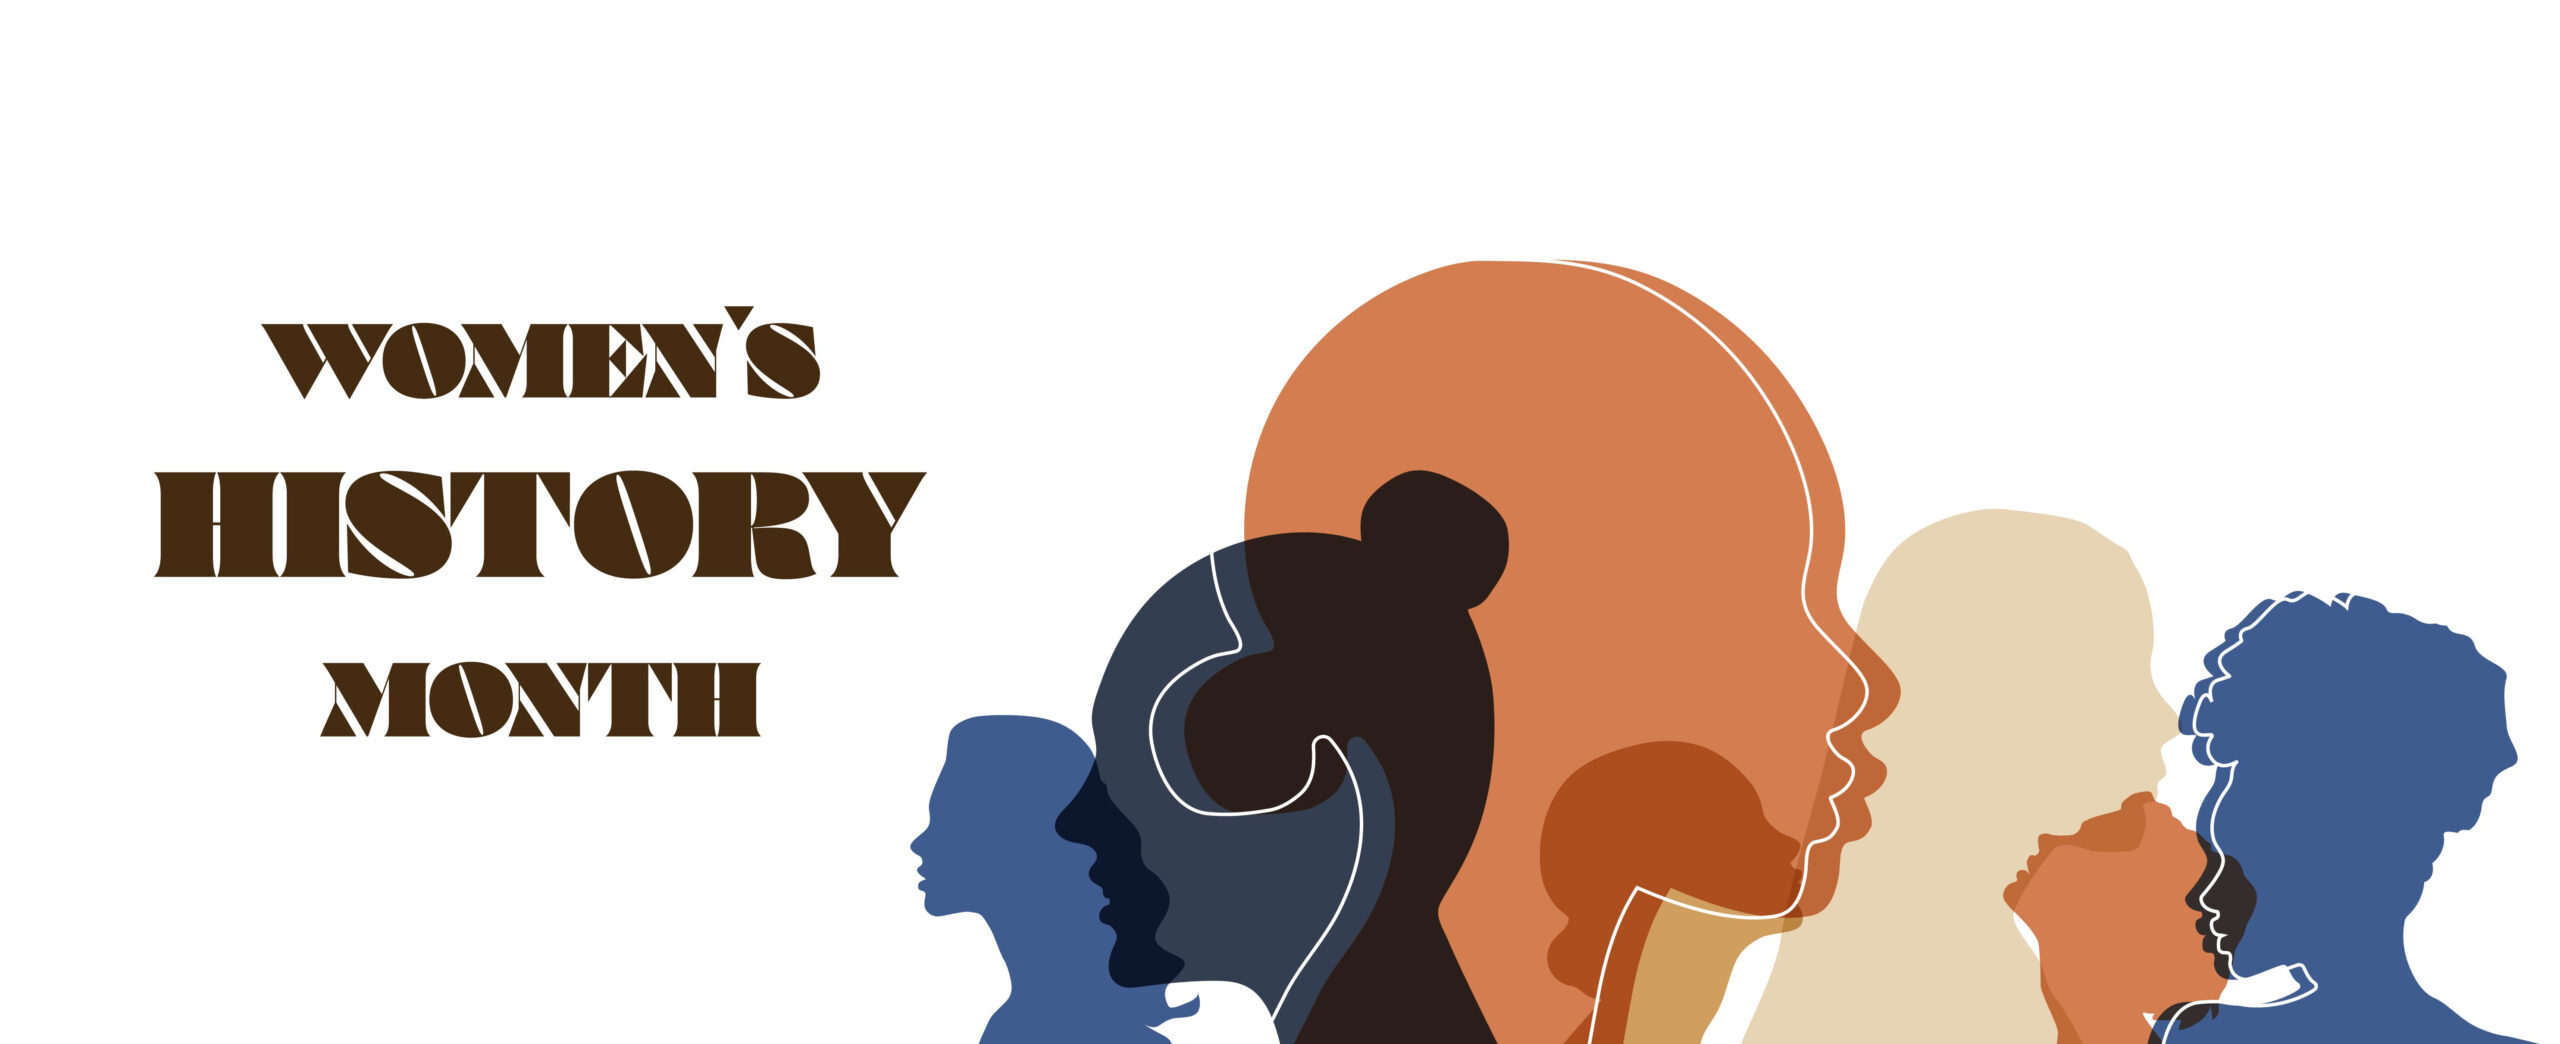 Donate to BlackPast during Women's History Month